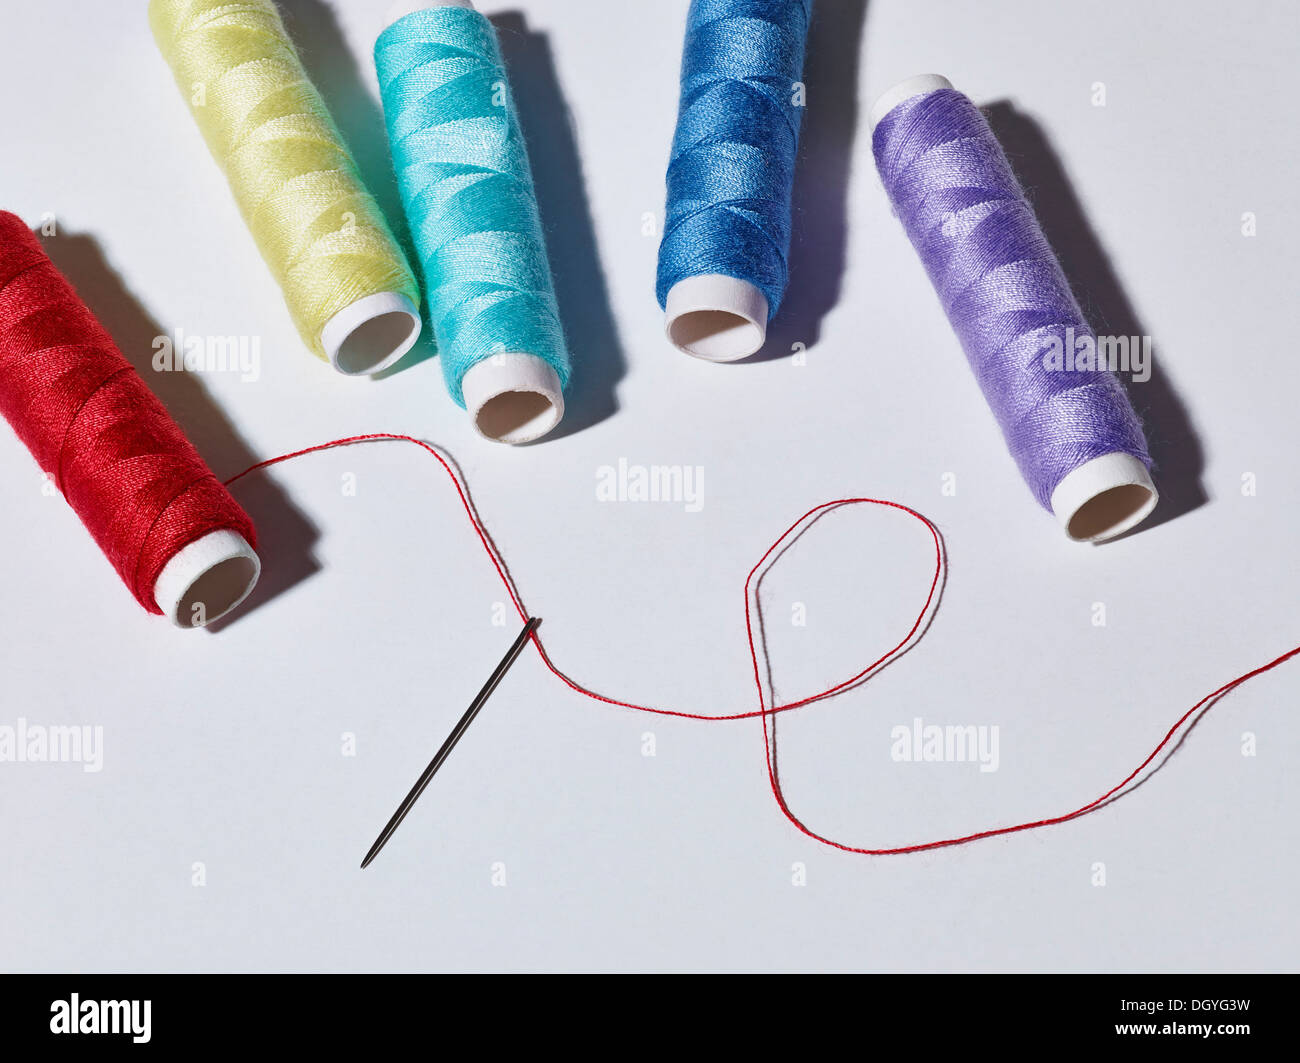 A threaded needle lying below five spools of different colored thread Stock Photo